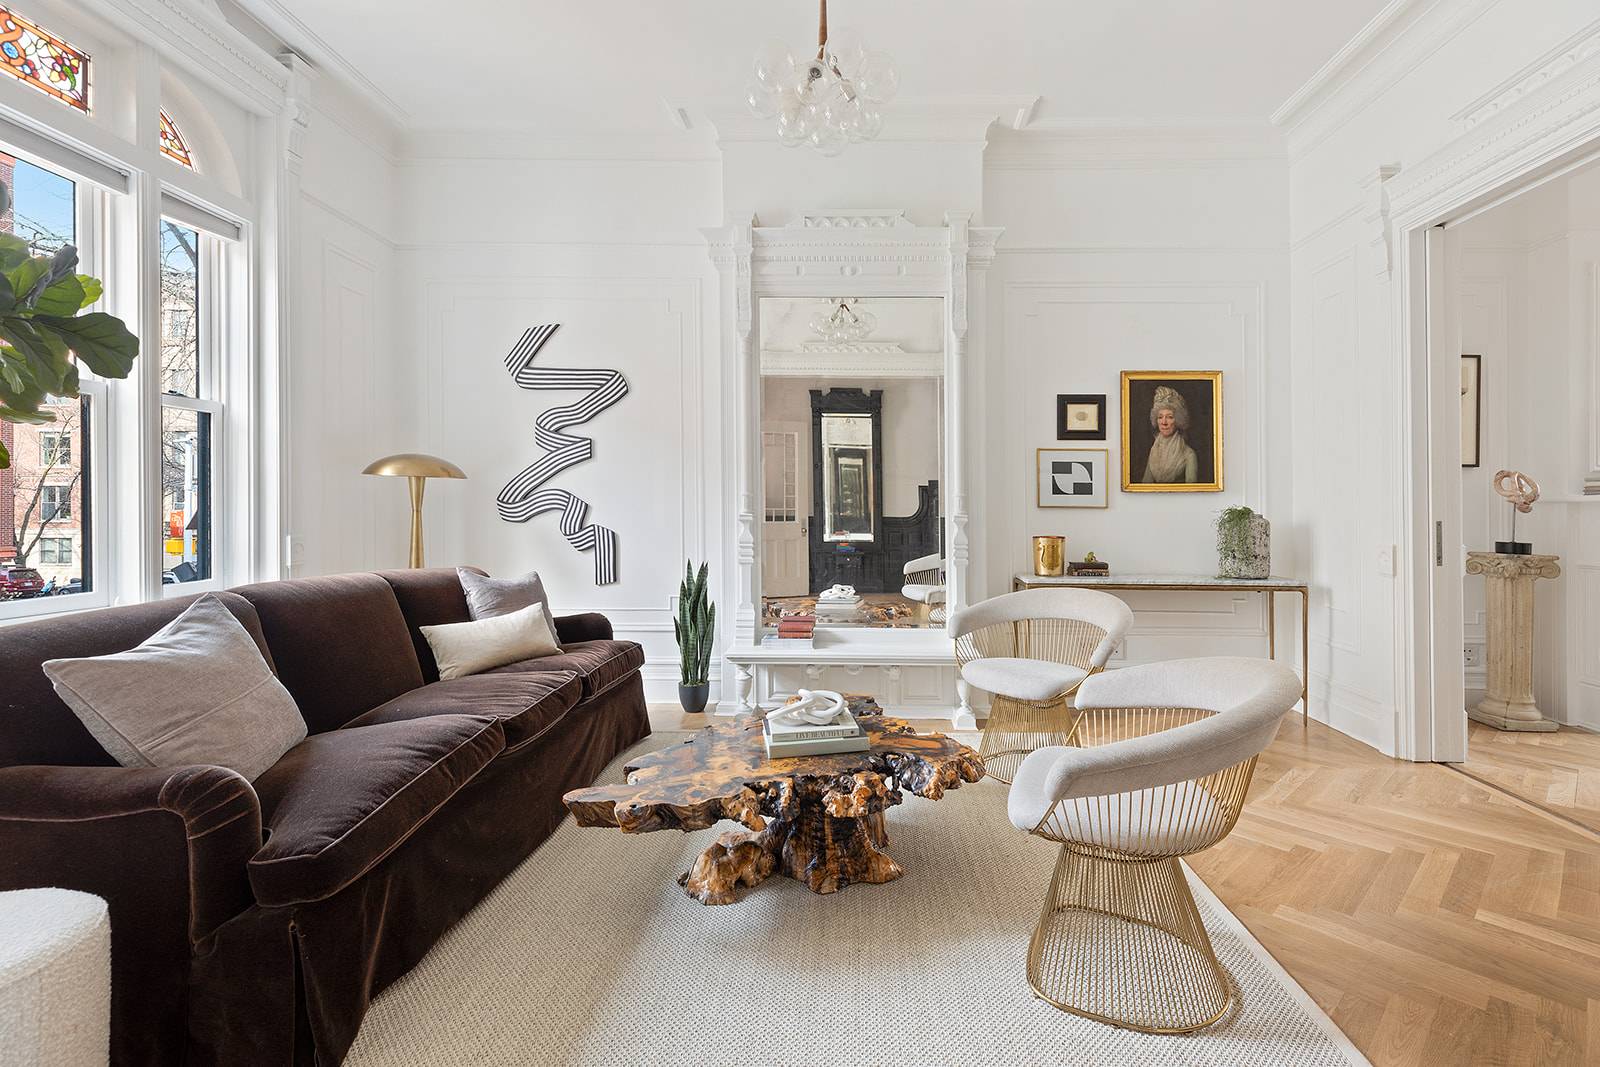 Own a piece of history with this rare, breathtaking, Landmarked 1887 Romanesque Revival Park Slope townhouse with four stories finished basement.